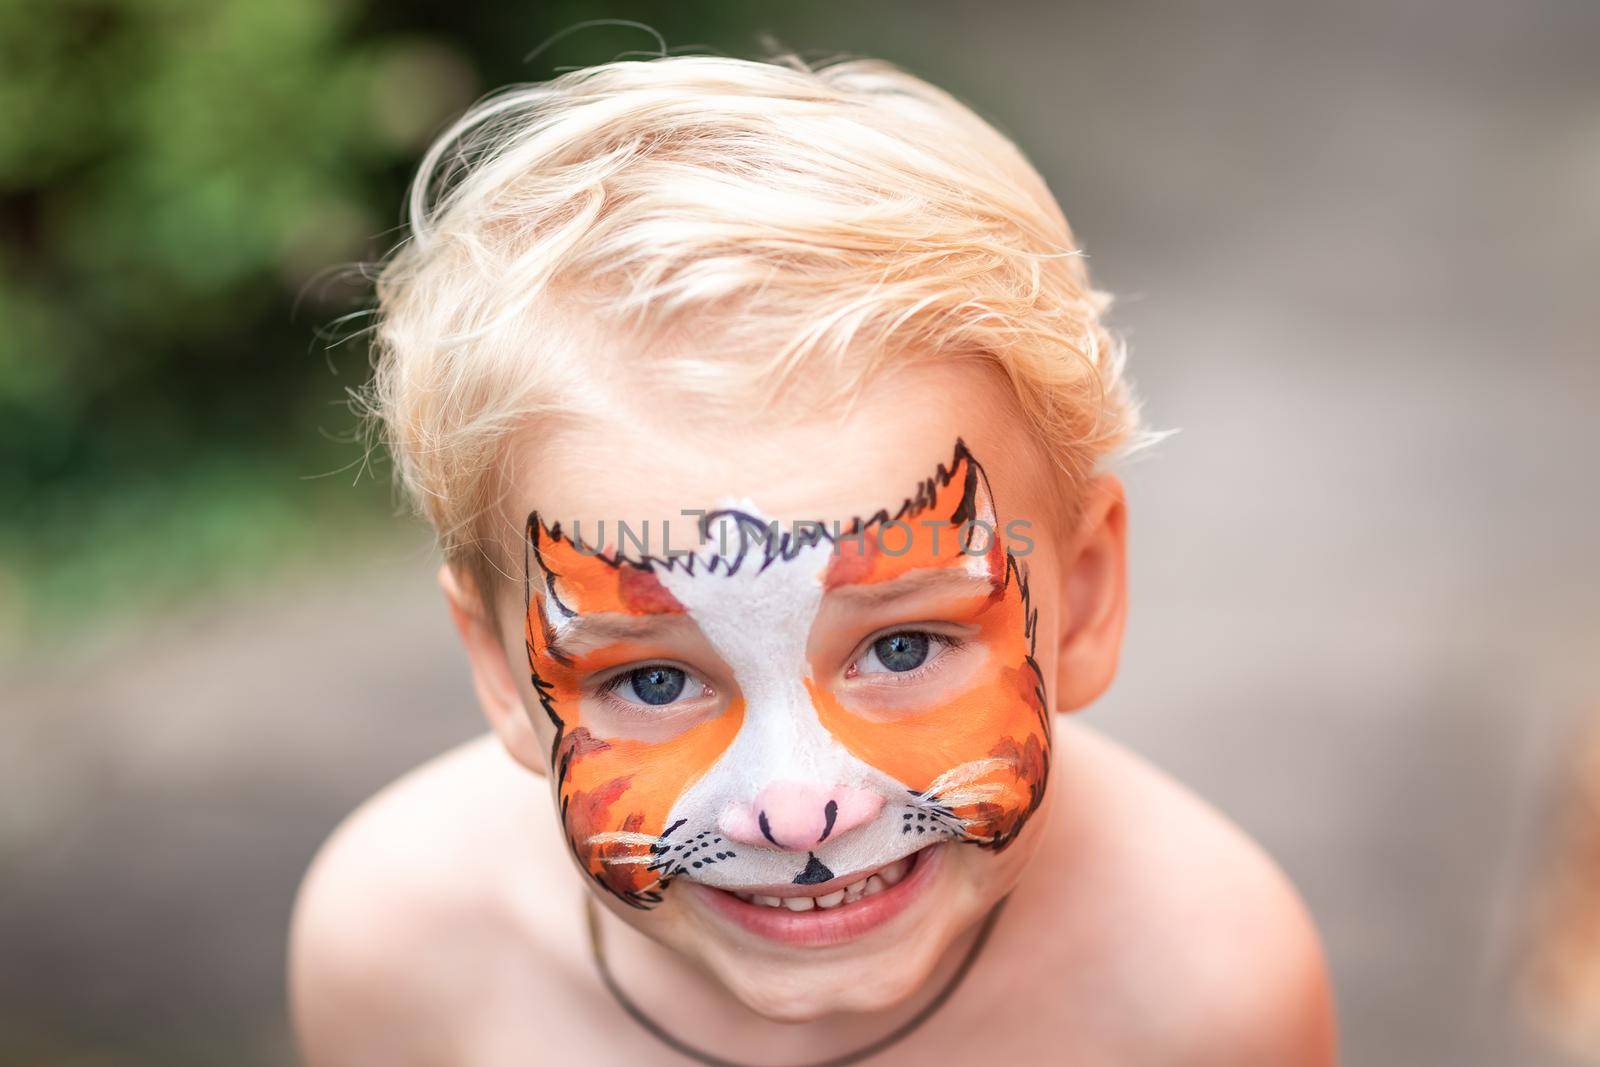 Cute little boy with his face painted by Len44ik